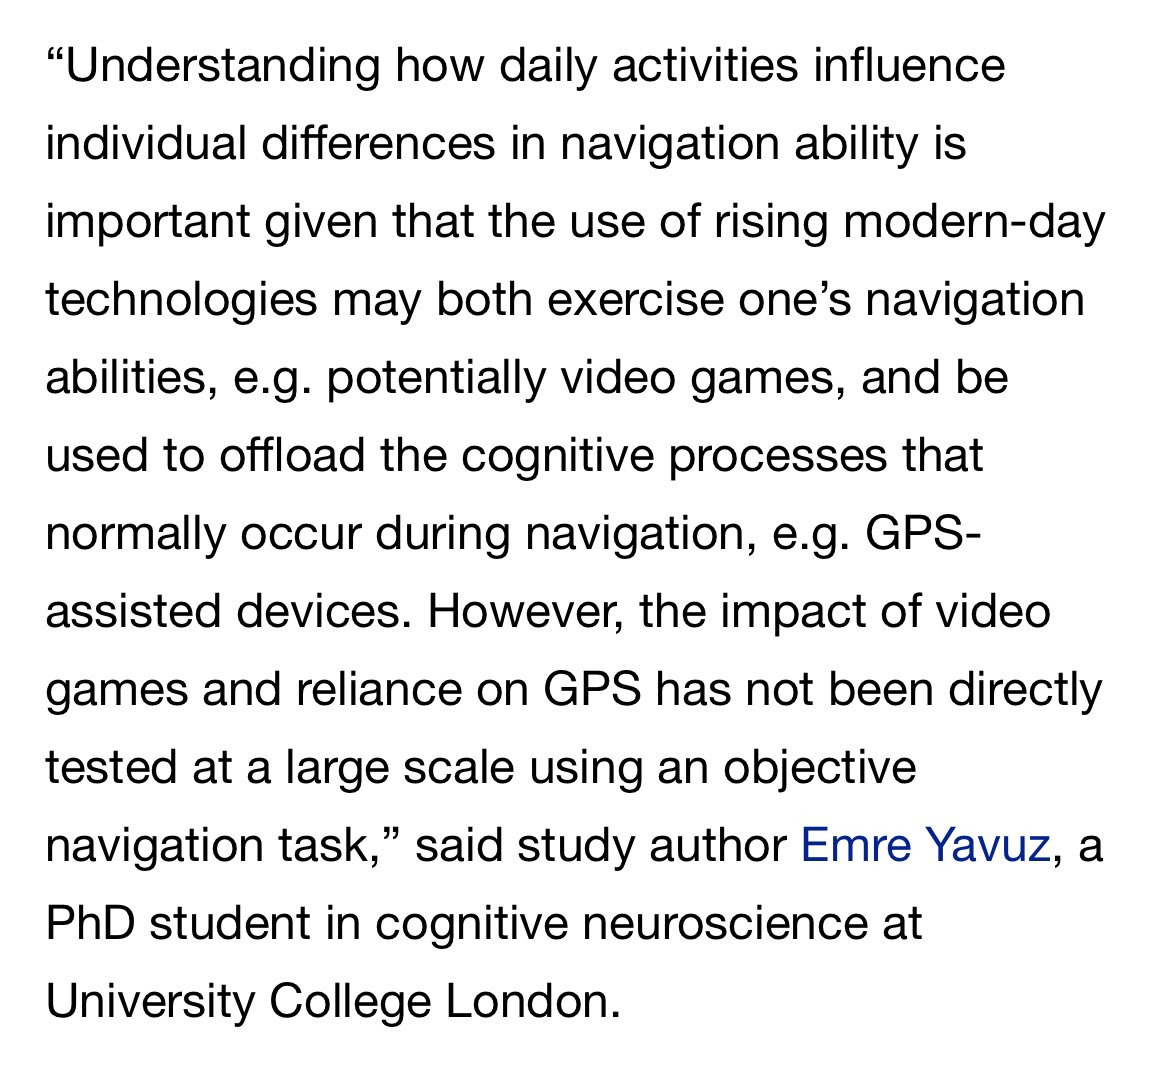 Great to see press coverage of our recent paper - Video gaming, but not reliance on GPS, is associated with spatial navigation performance - in @PsyPost! 🧠🙌

➡️ shorturl.at/ejDb8

➡️ Link to the original paper: shorturl.at/h0dEn